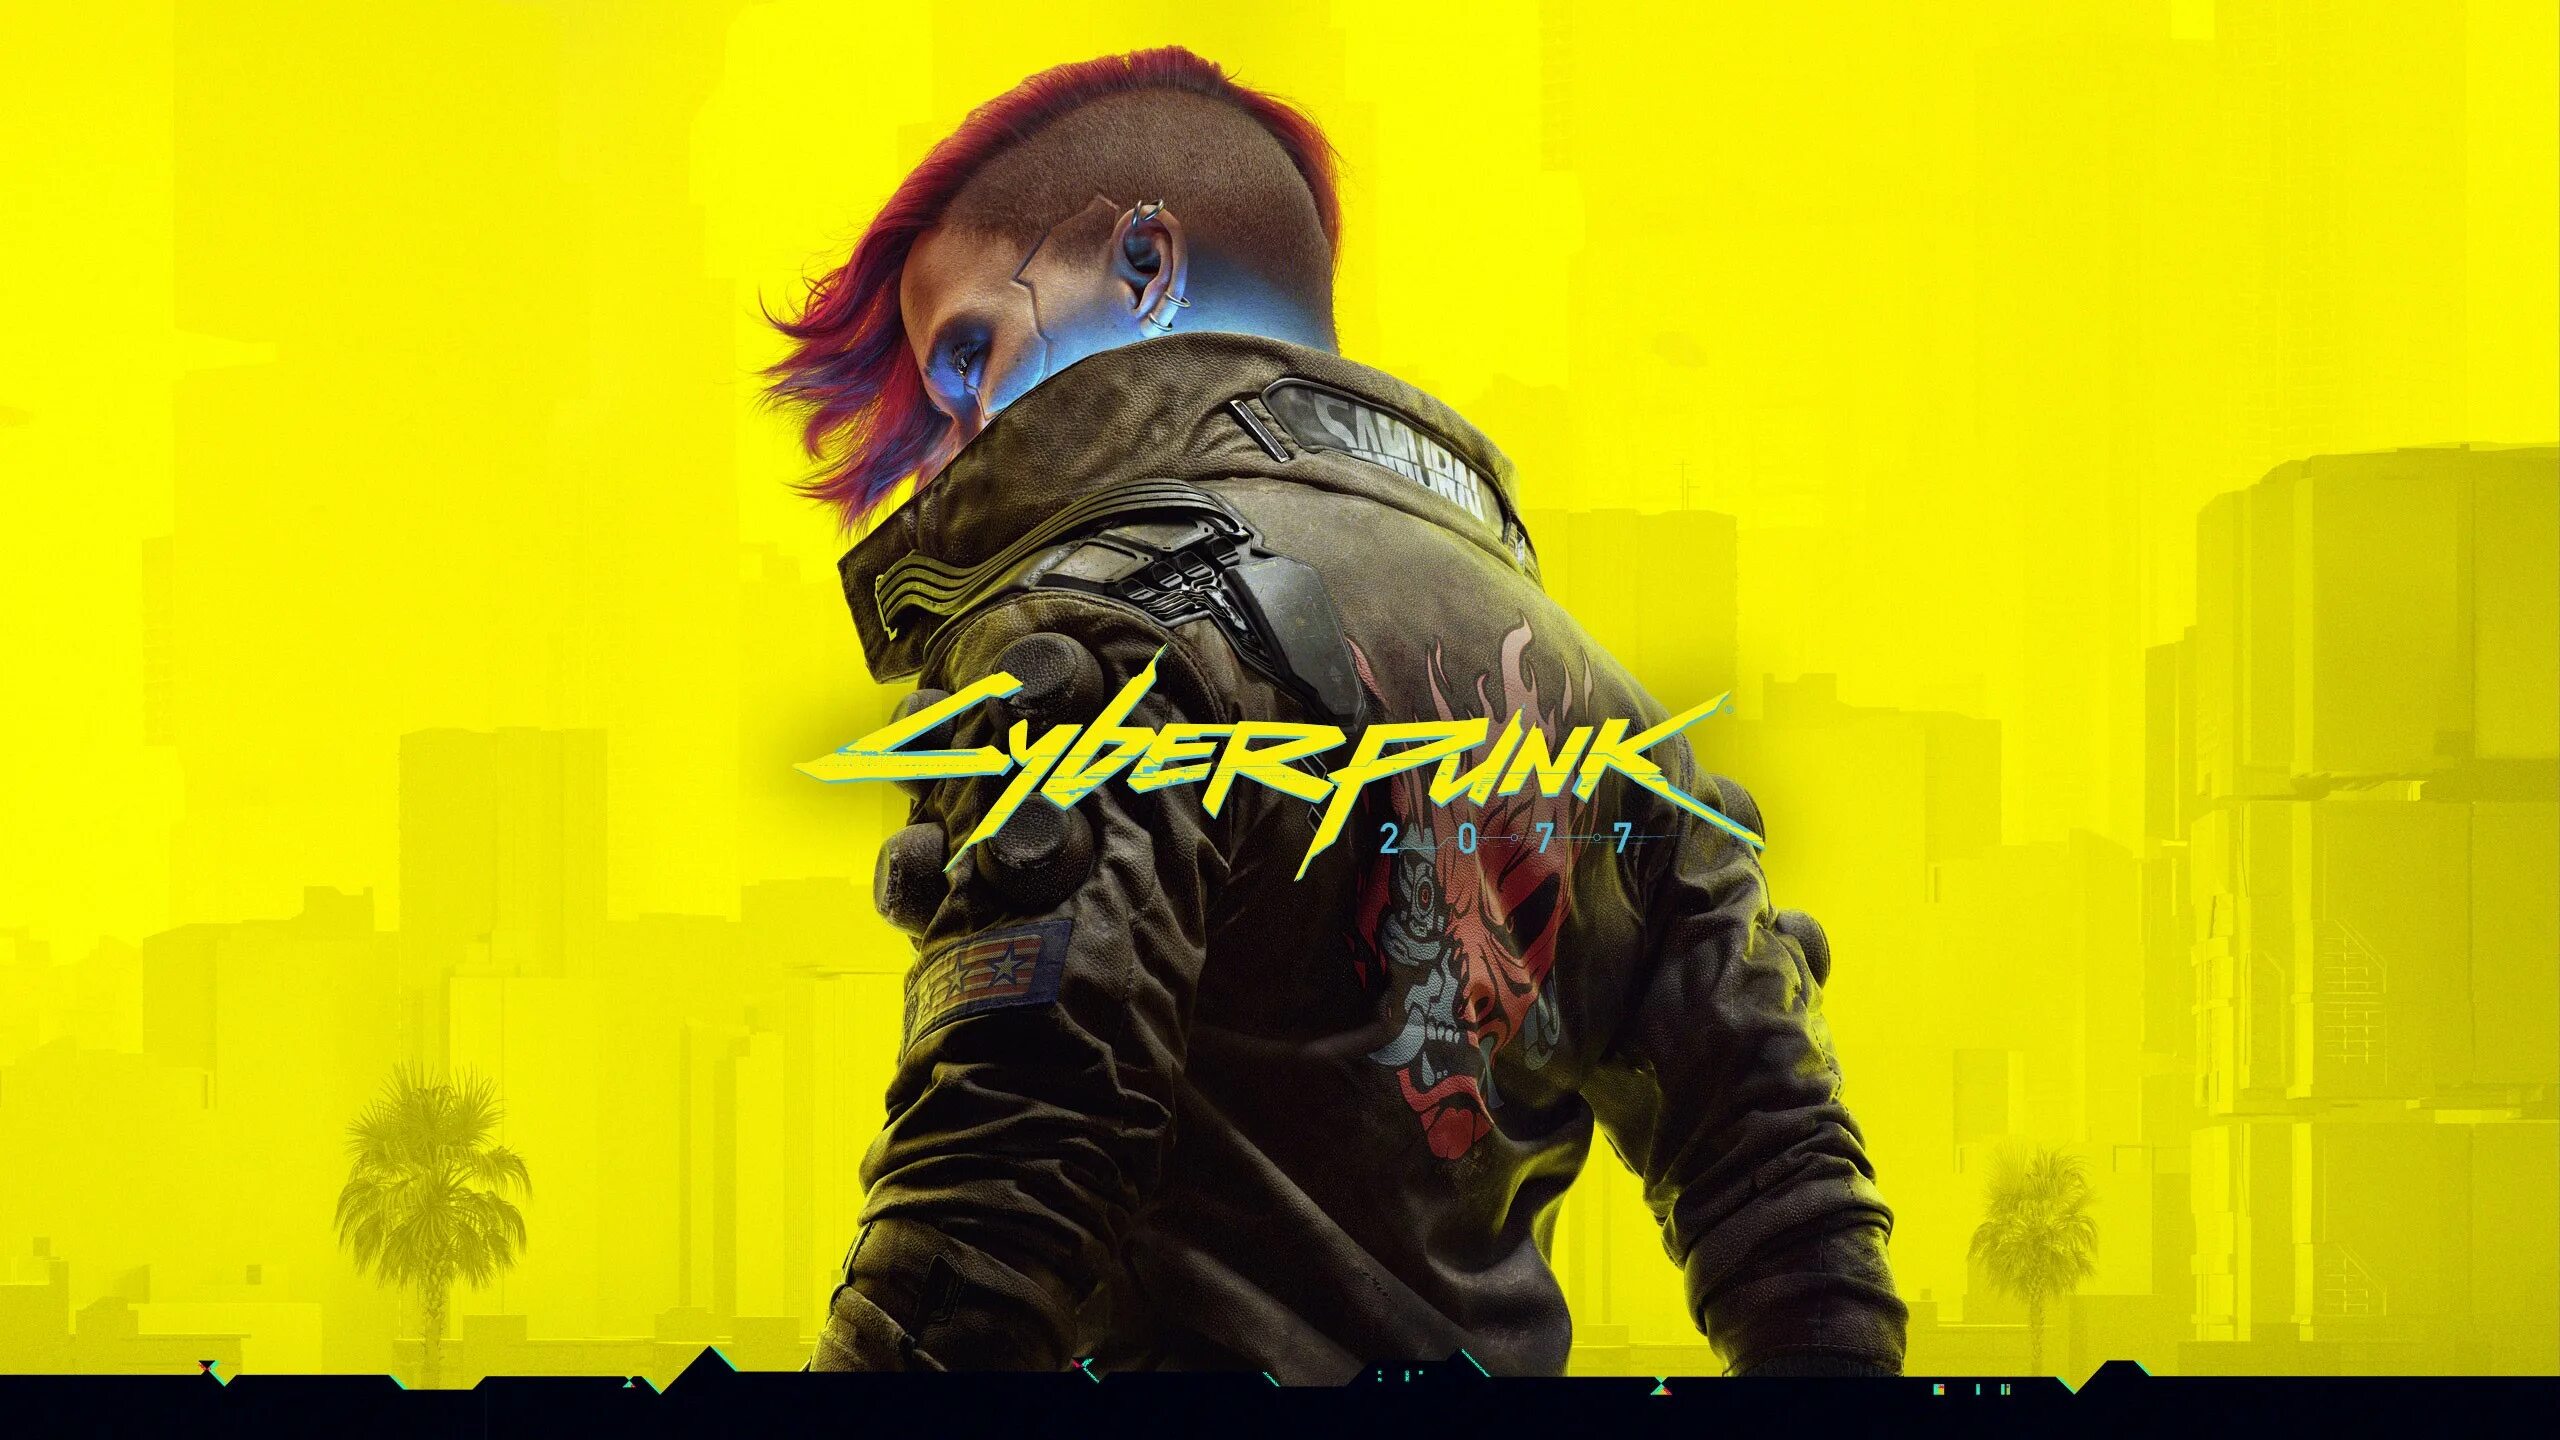 CD Projekt Red киберпанк 2077. Xbox one Cyberpunk 2077. Cyberpunk 2077 патч. Киберпанк 2077 ps5. Ps5 патчи